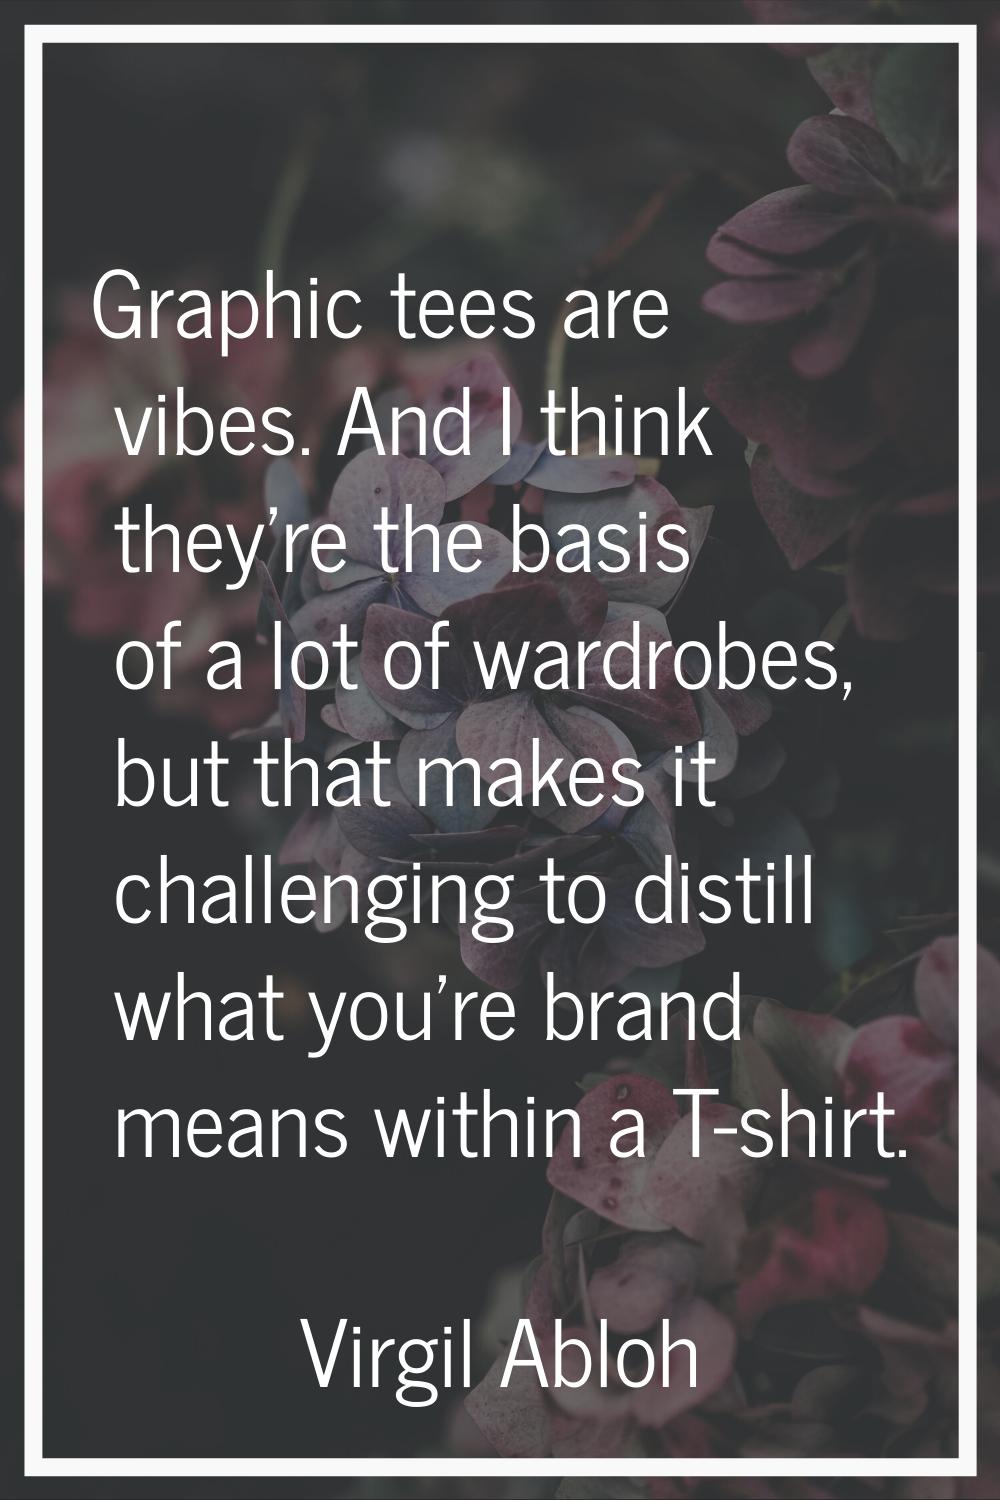 Graphic tees are vibes. And I think they're the basis of a lot of wardrobes, but that makes it chal